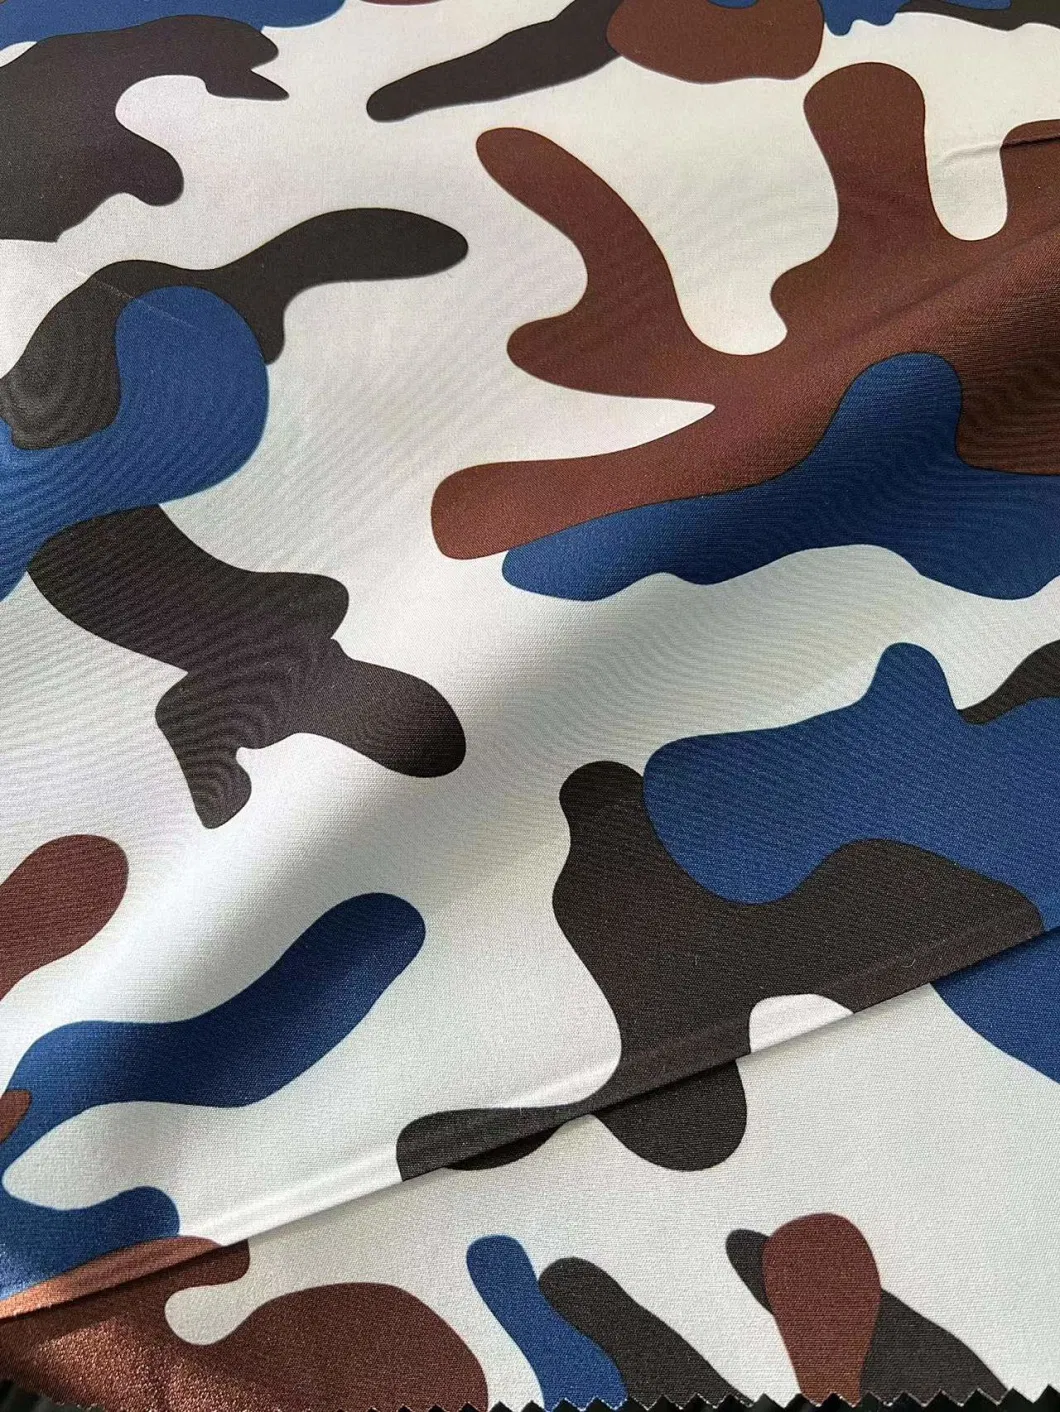 Recycled Polyester 4-Way Elastic TPU Bonding Camouflage Printed Soft Shell Outwear Fabric